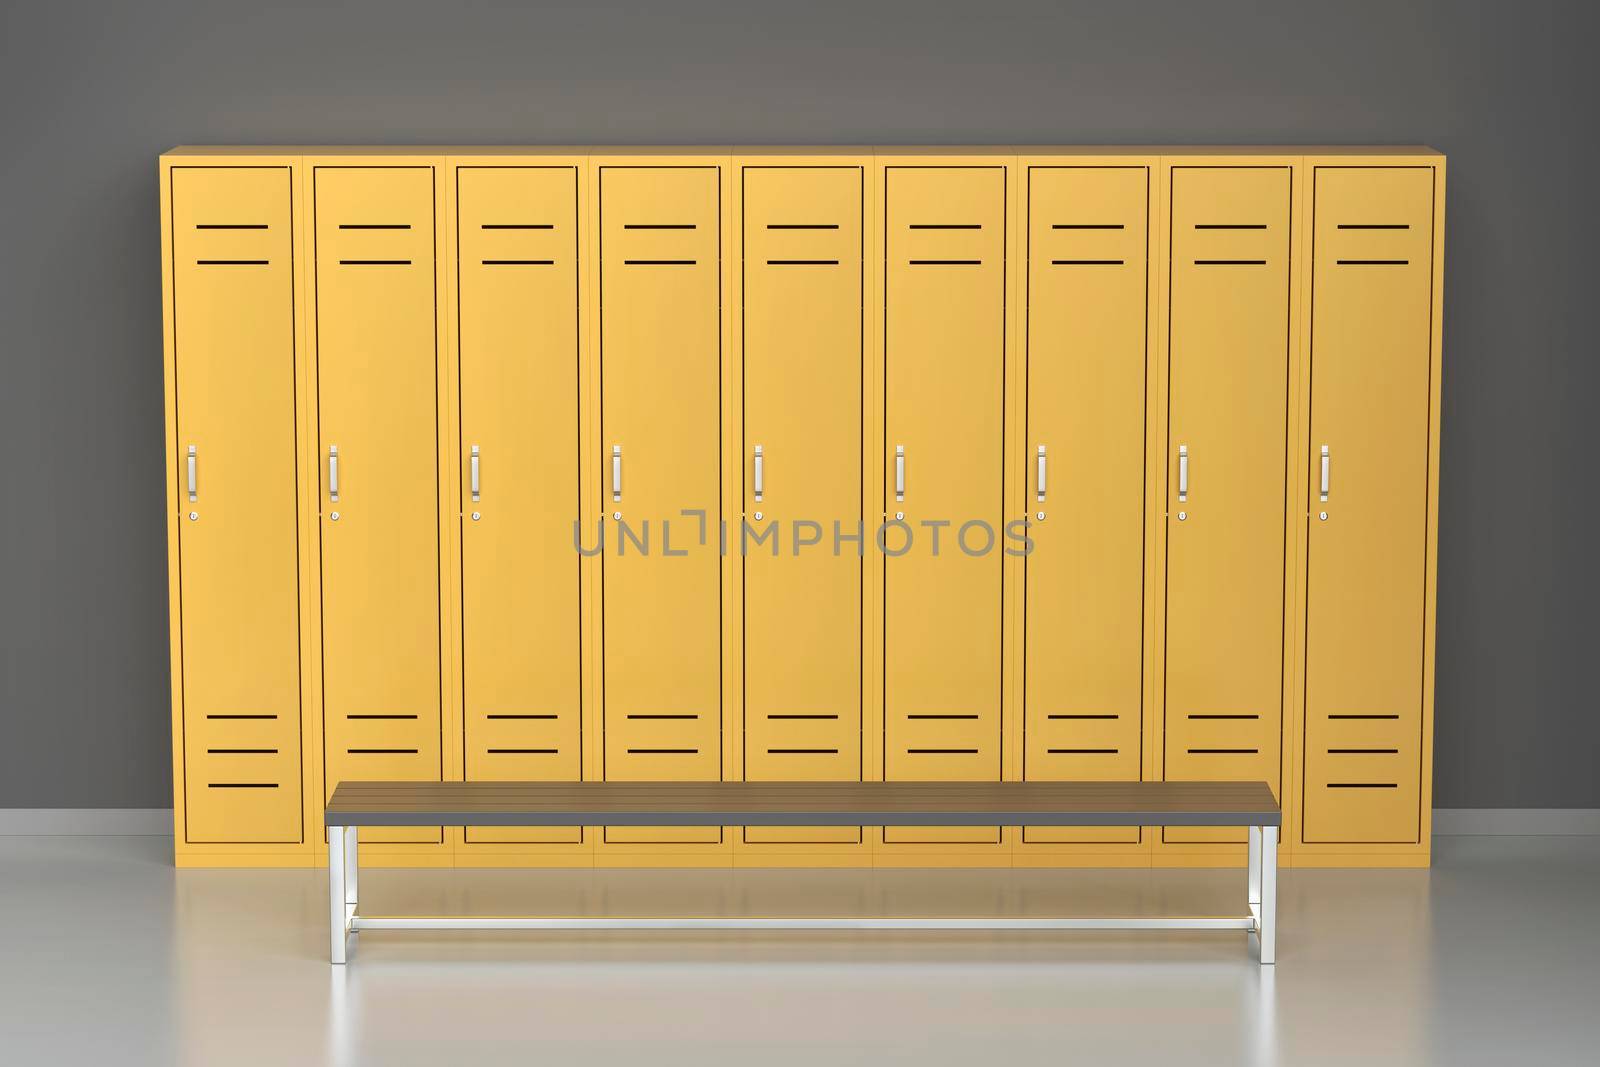 Yellow metal lockers in the changing room